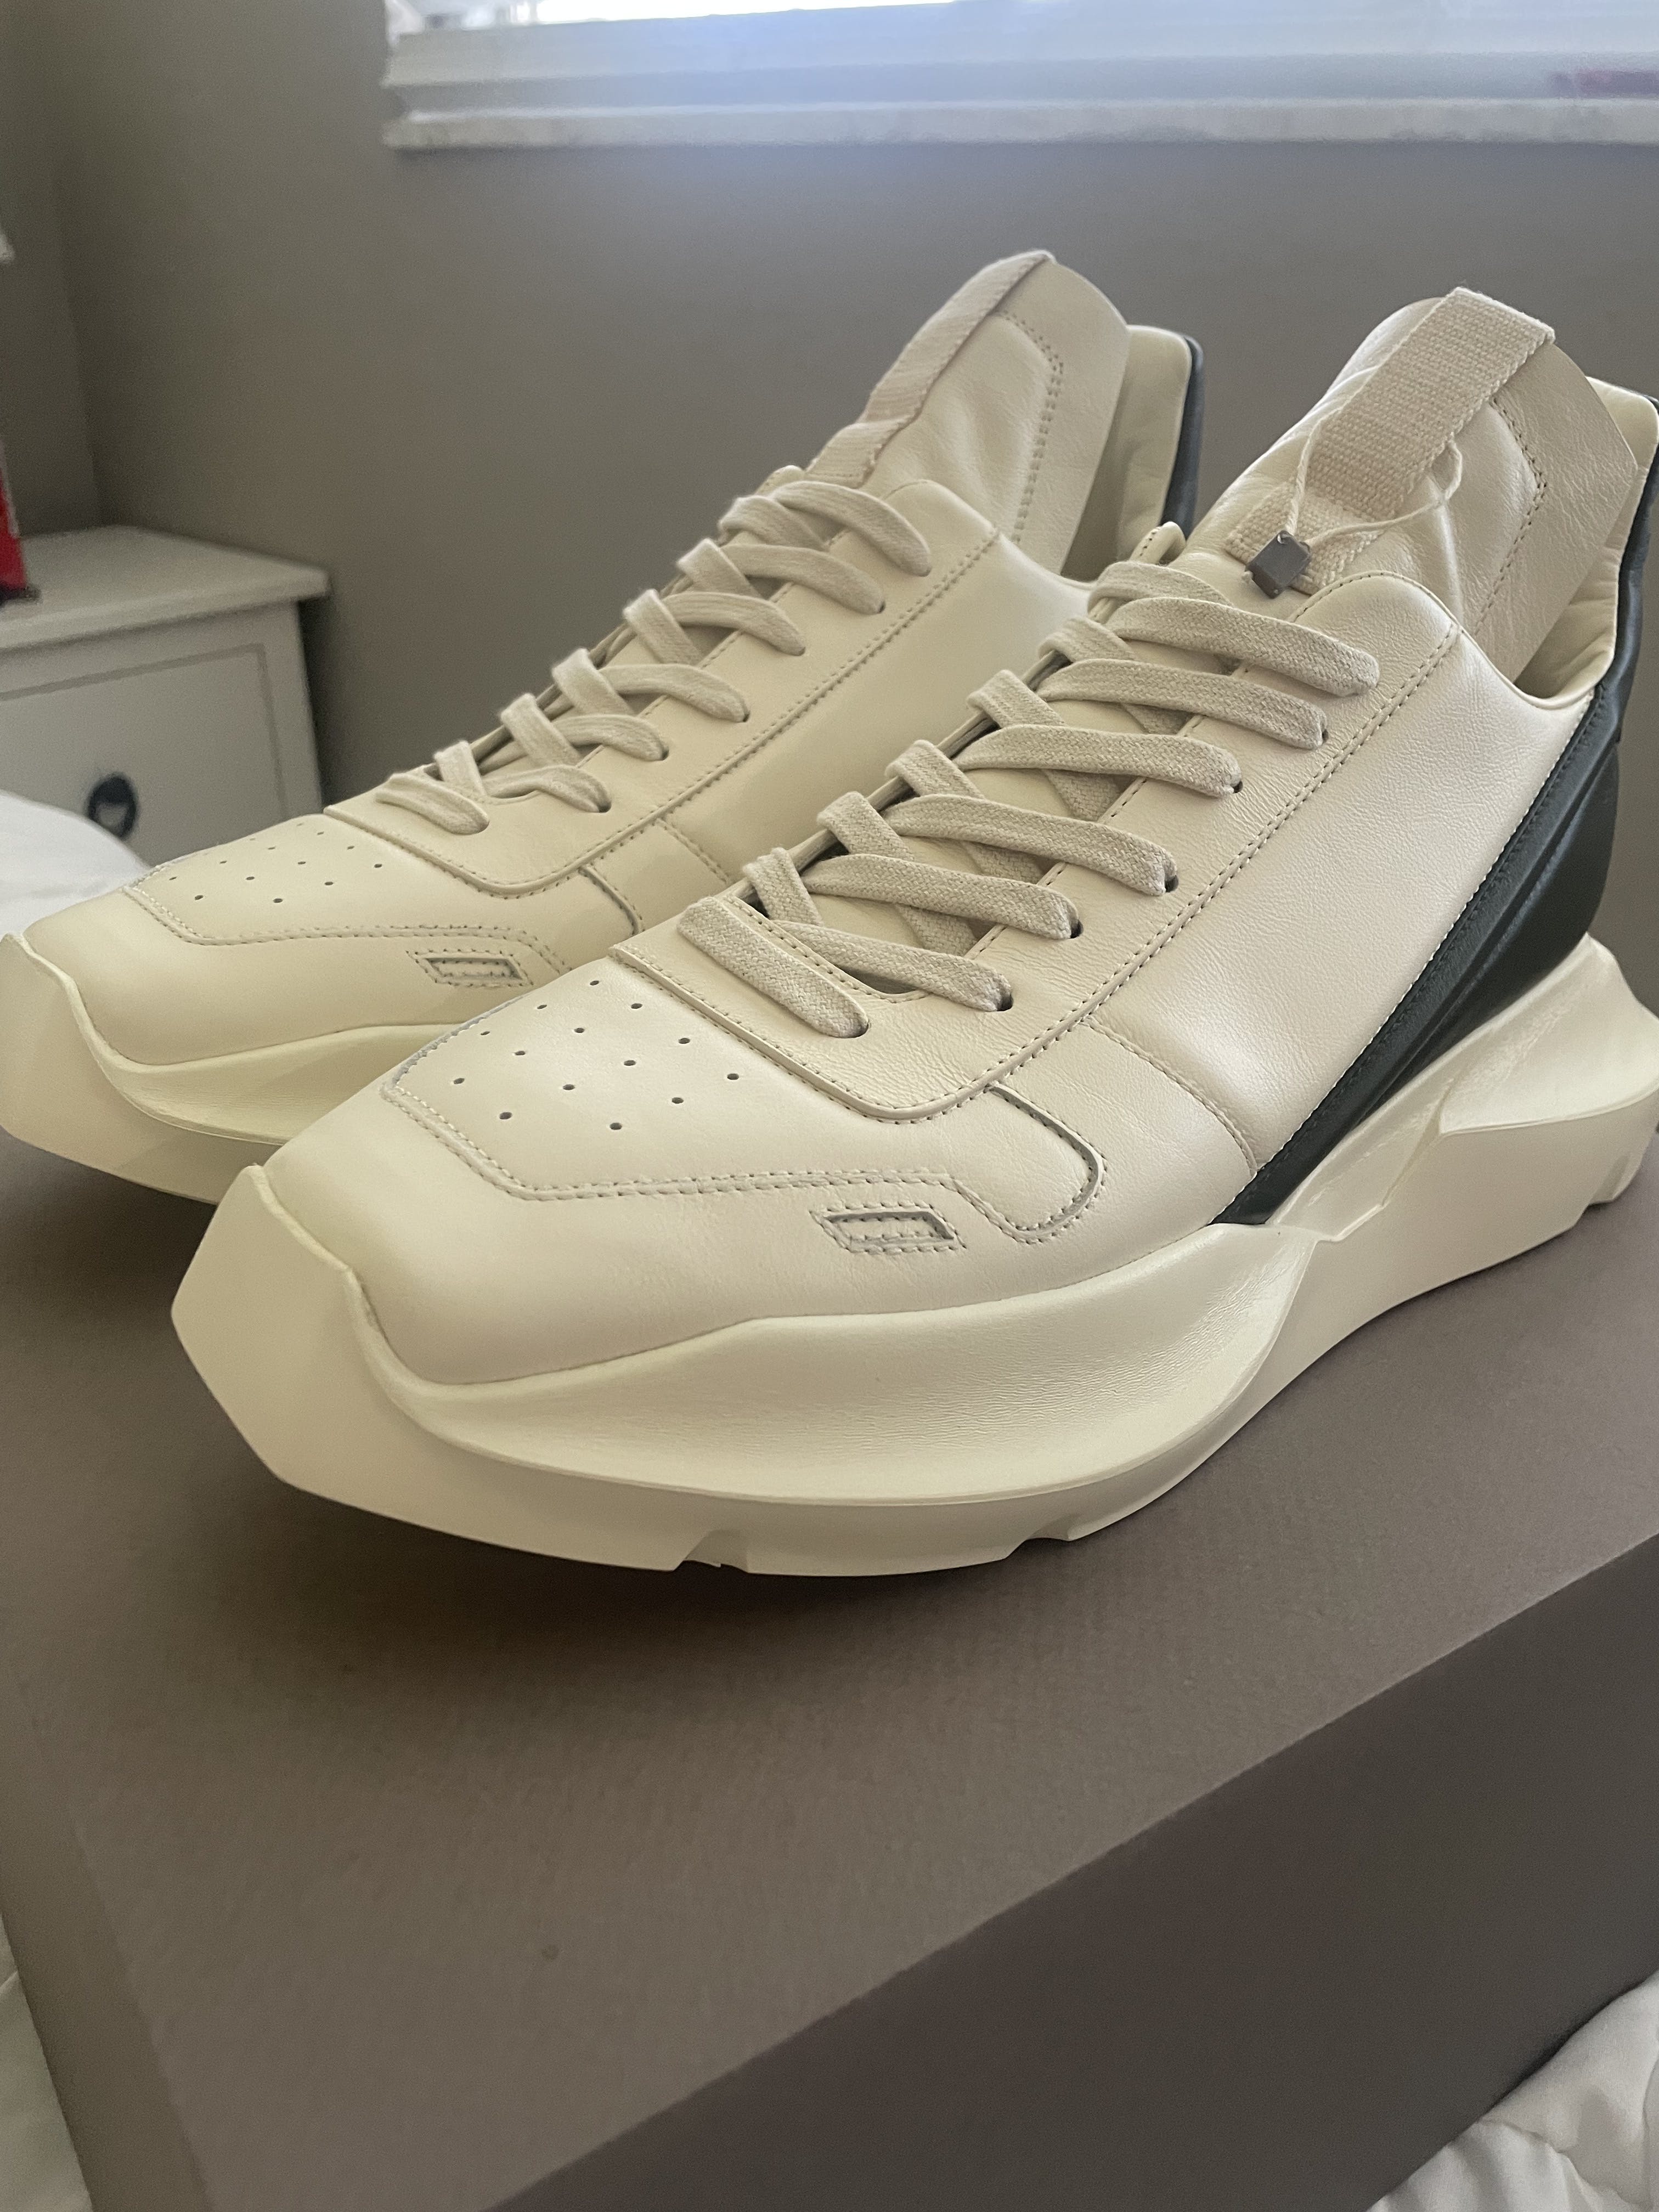 Rick Owens Geth Runners Green and Milk Size 45 Brand New - 1